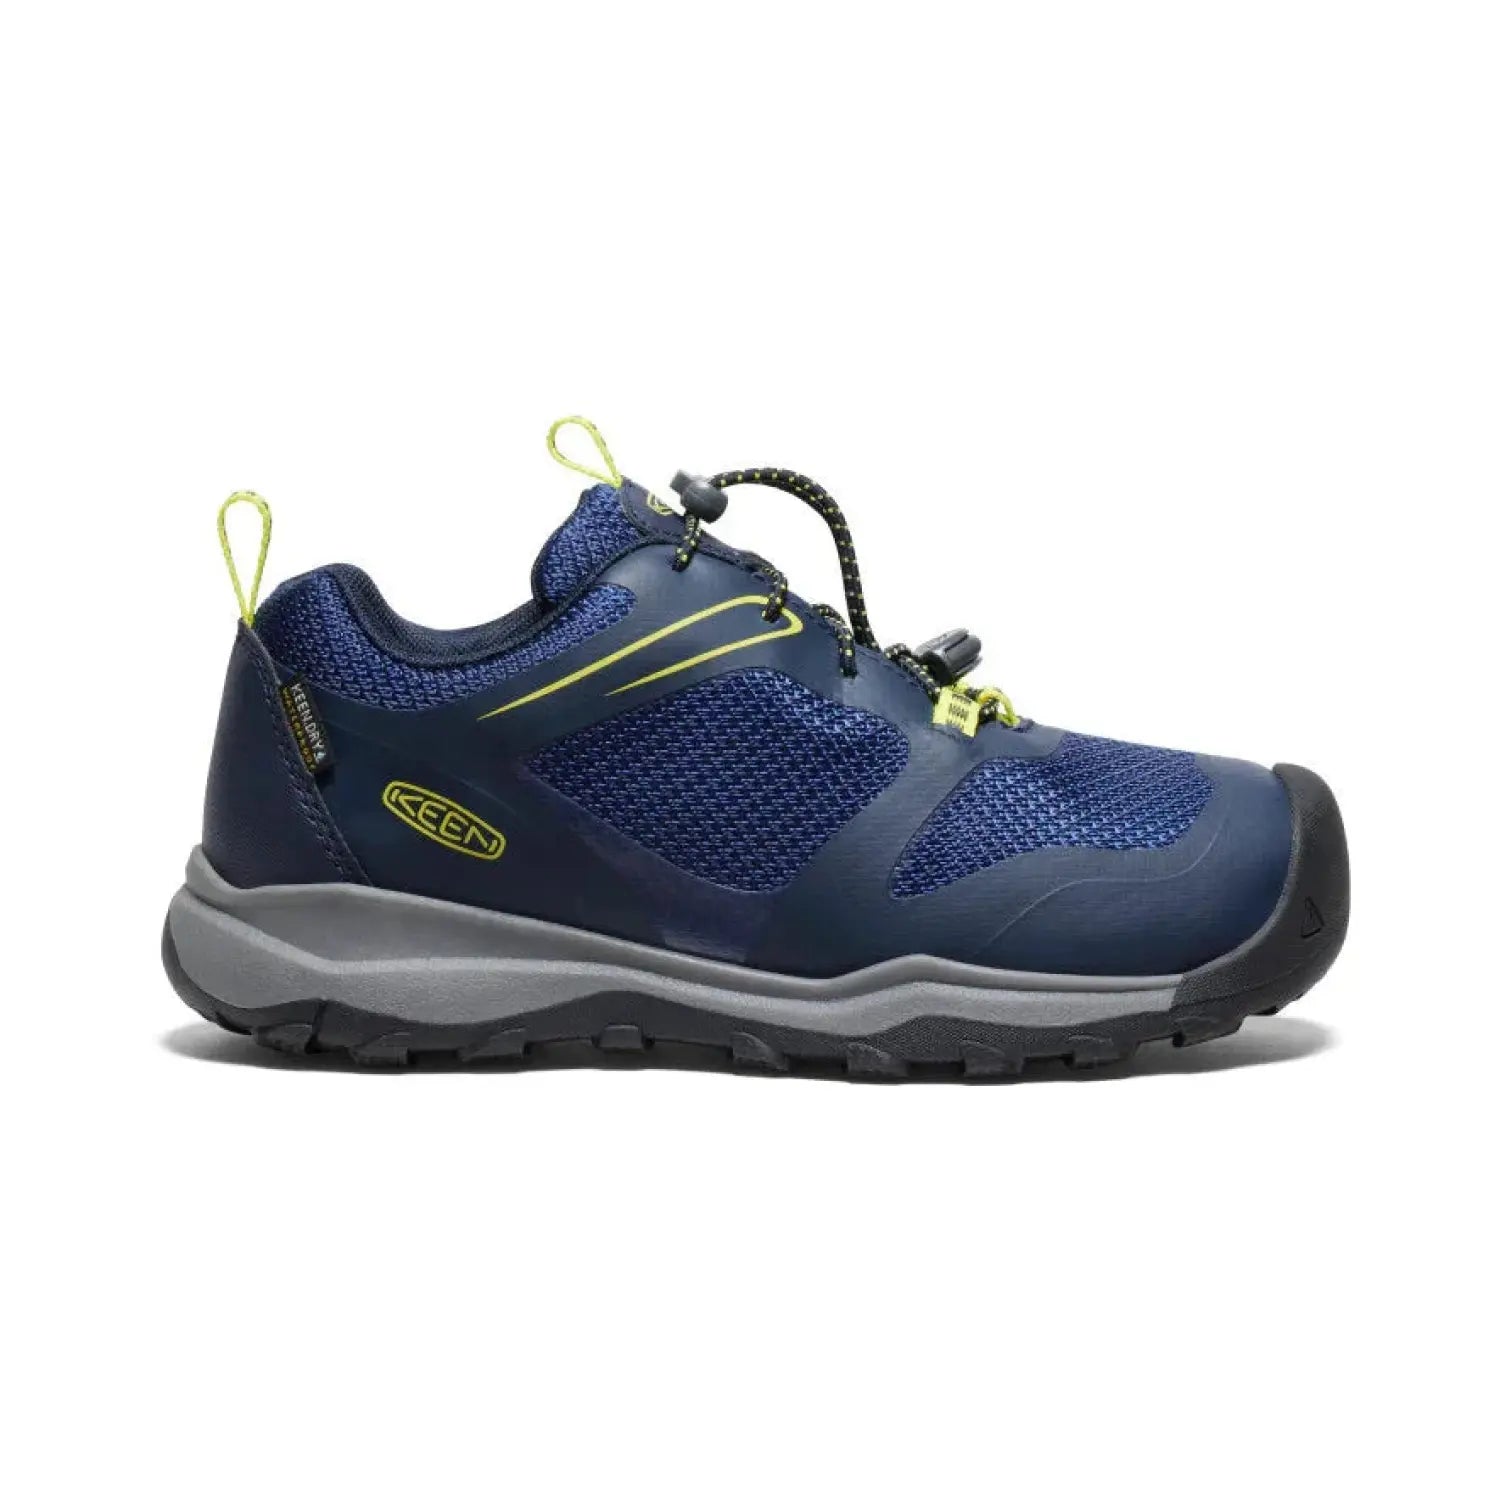 Keen Wanduro Waterproof Shoe in Sky Captain blue and Evening blue with pull laces. Side View.